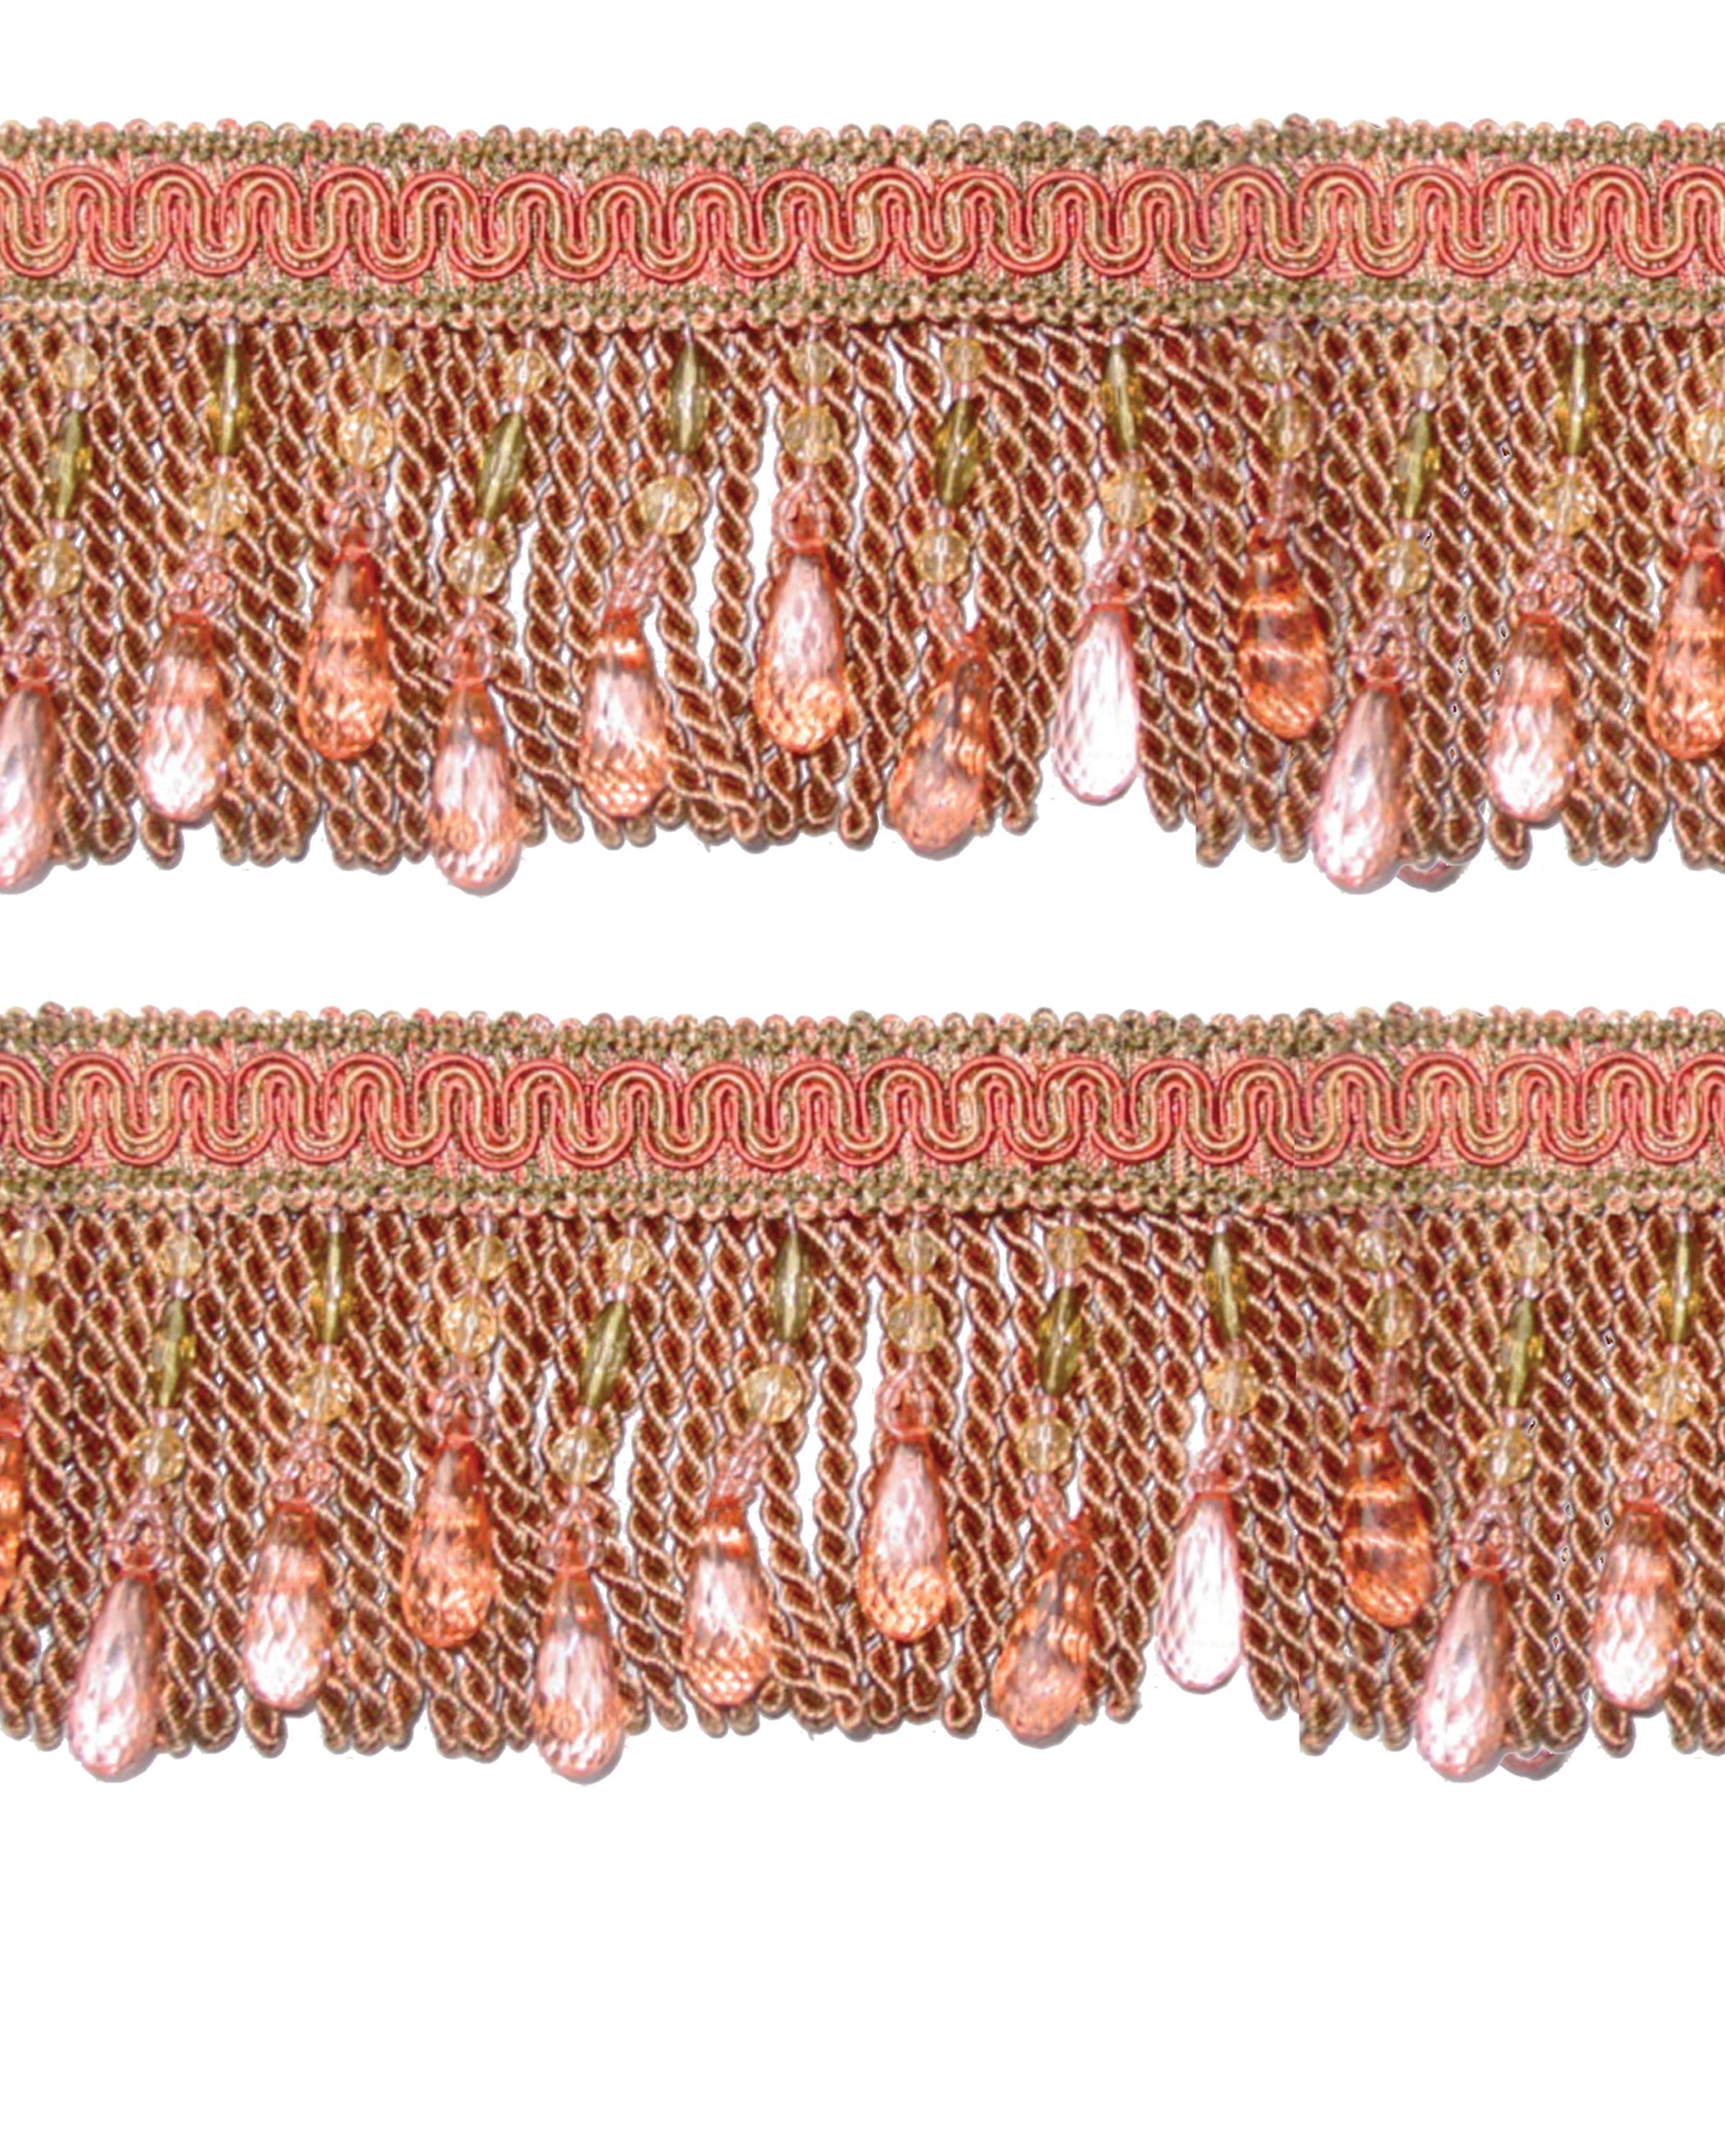 Bullion Fringe with Beads - Antique Dark Pink / Olive 105mm Price is for 5 metres